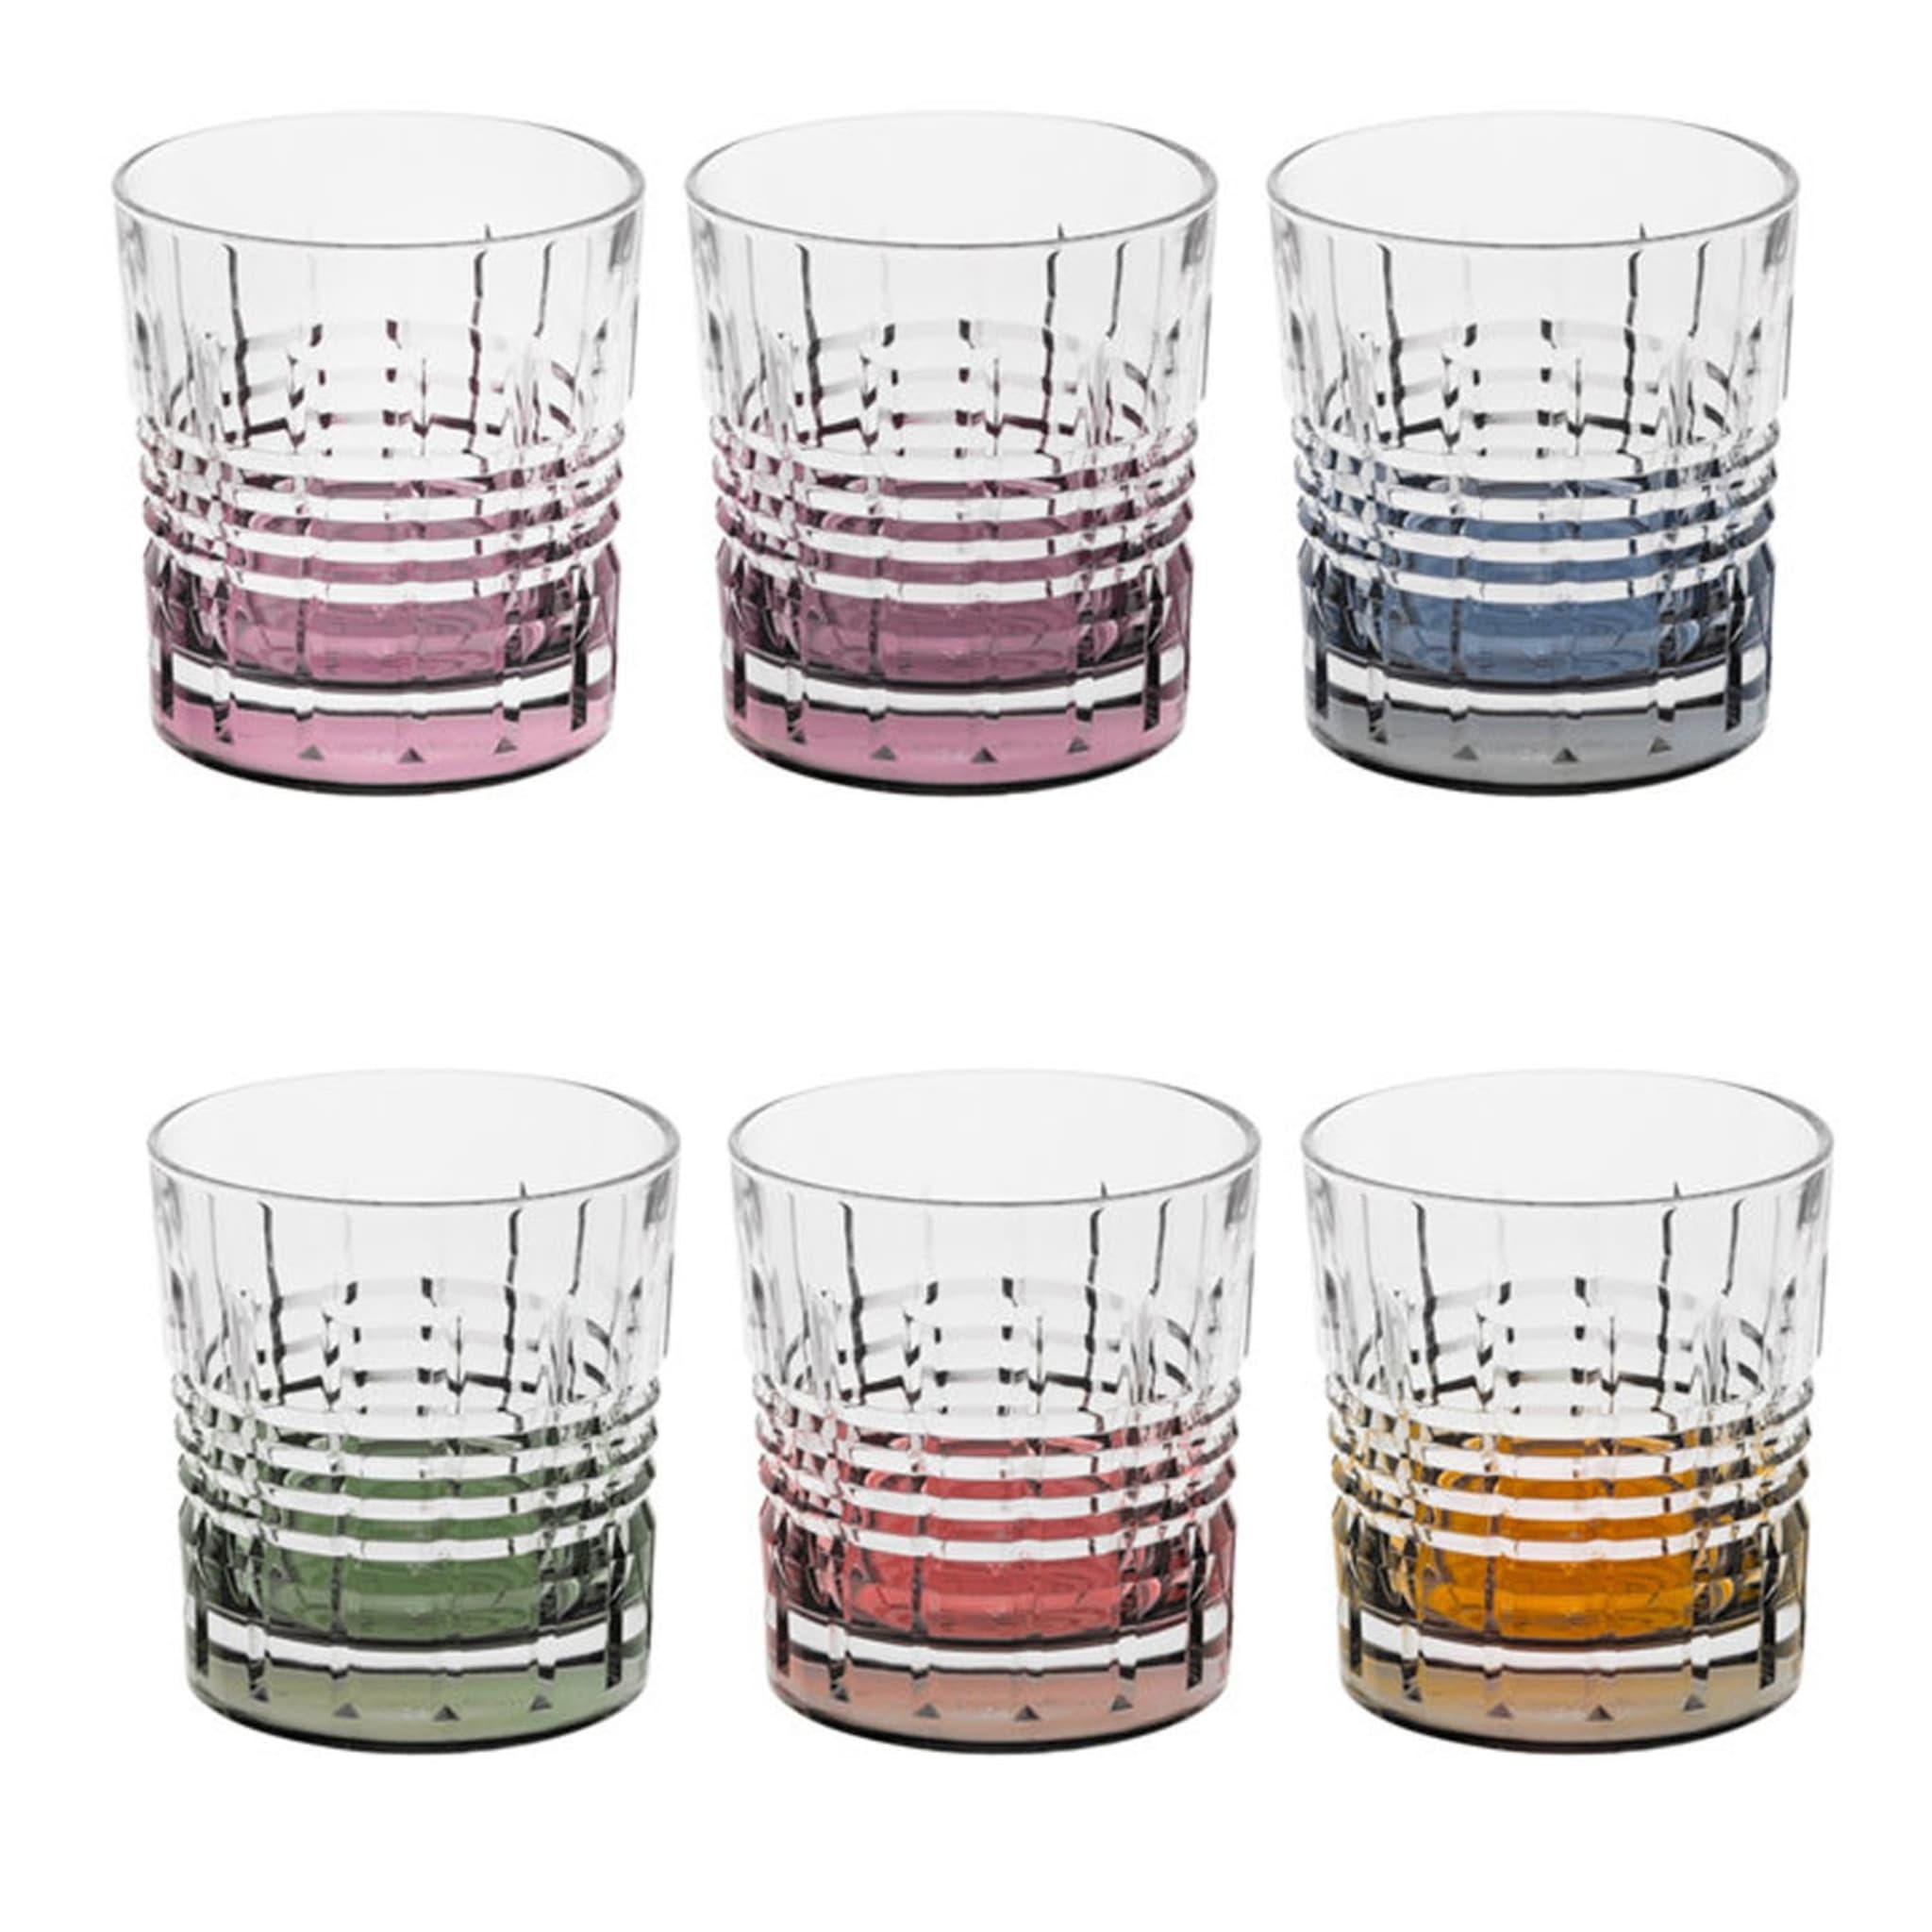 Delicate colors, striking texture, and exquisite craftsmanship are the distinctive qualities of this set from the Incontro Collection. Each of these six water glasses is fashioned of crystal and hand decorated with hints of pastel hues on the bottom